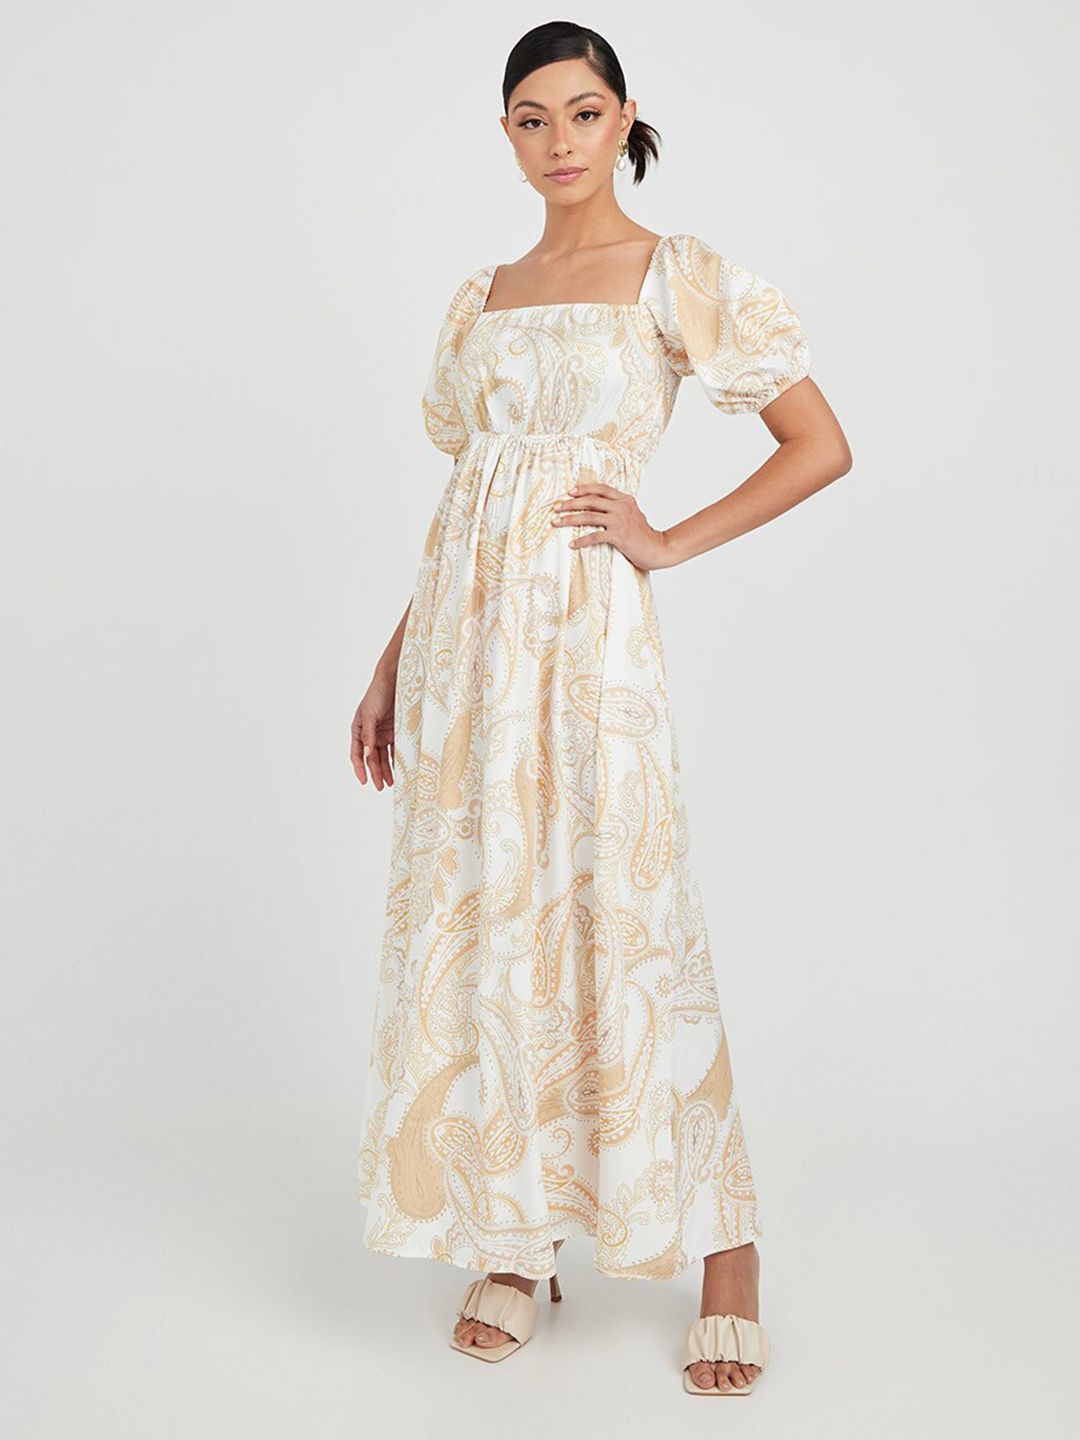 Styli White Floral Maxi Dress Price in India